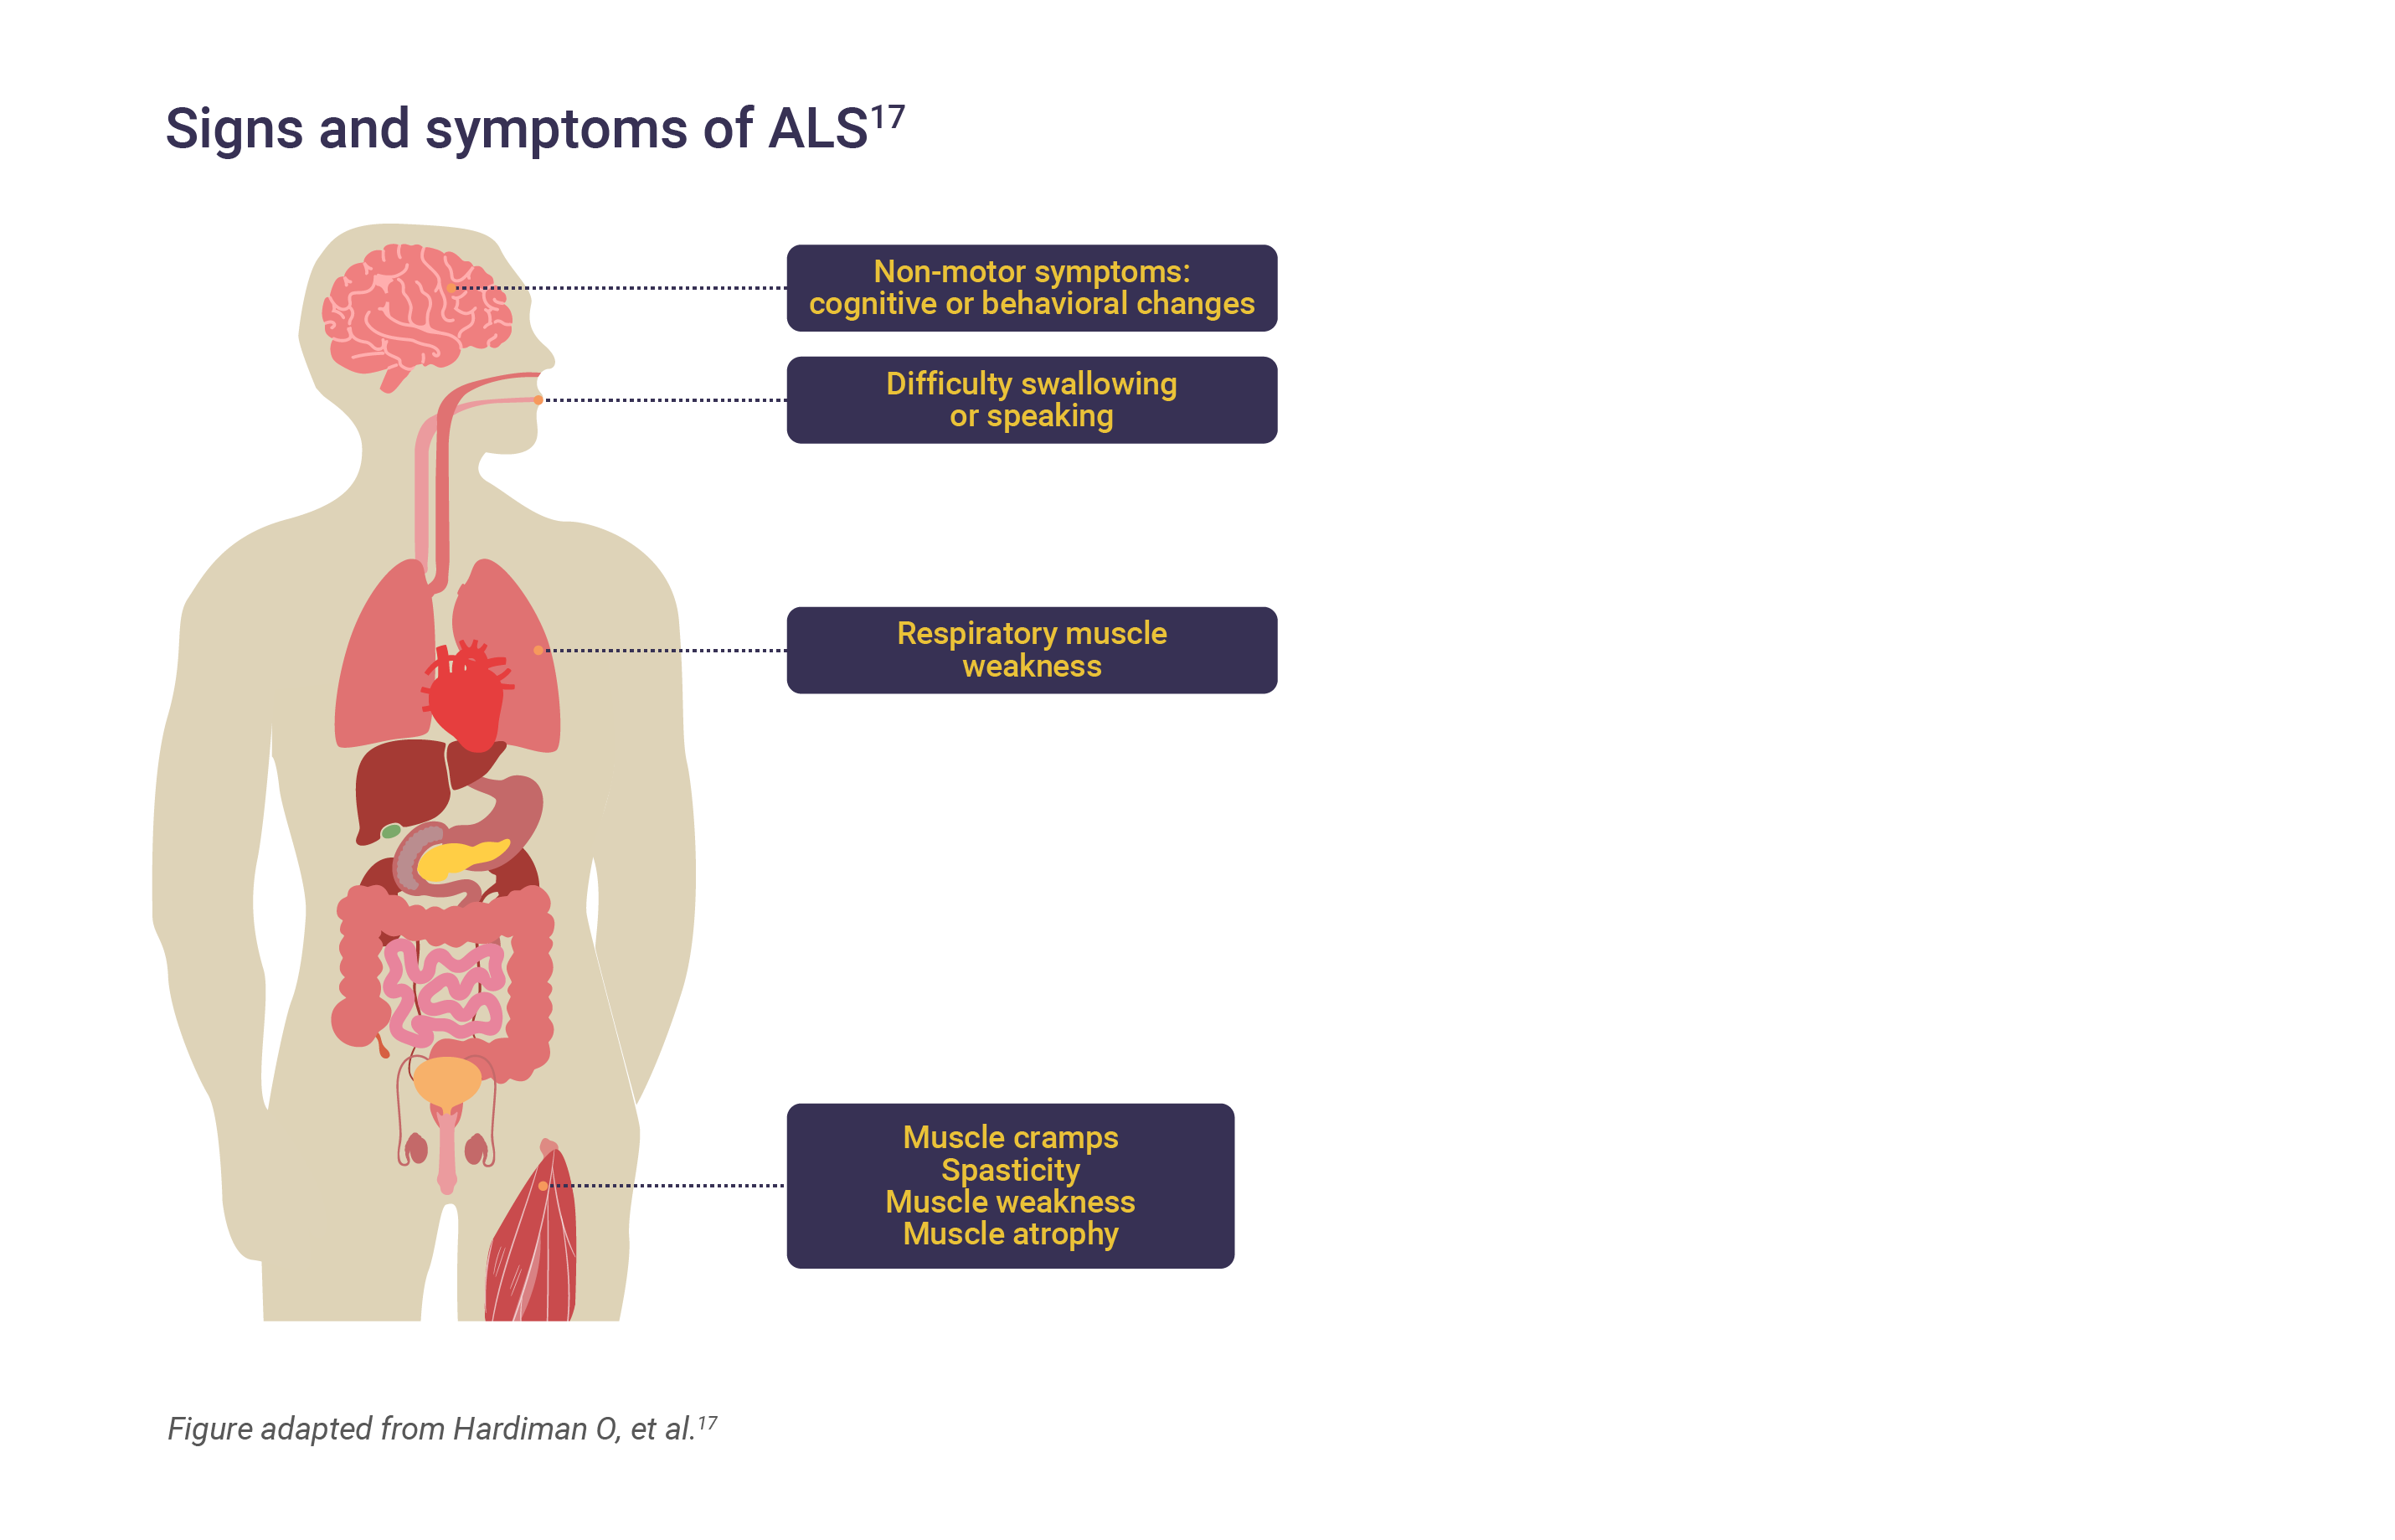 Signs and symptoms of ALS